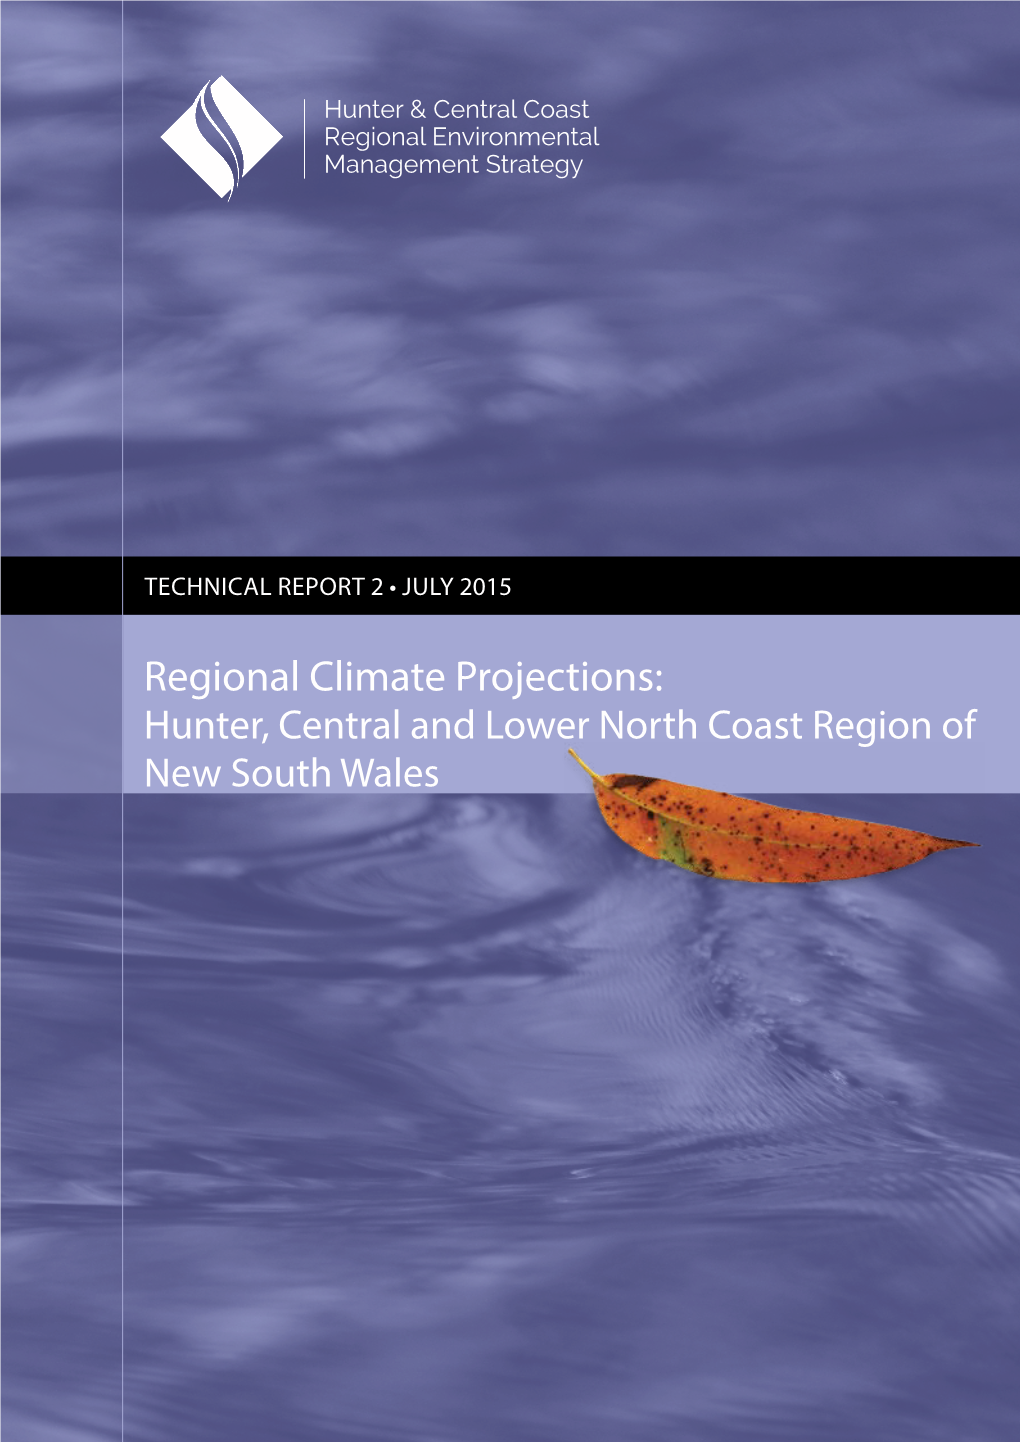 Regional Climate Projections: Hunter, Central and Lower North Coast Region of New South Wales